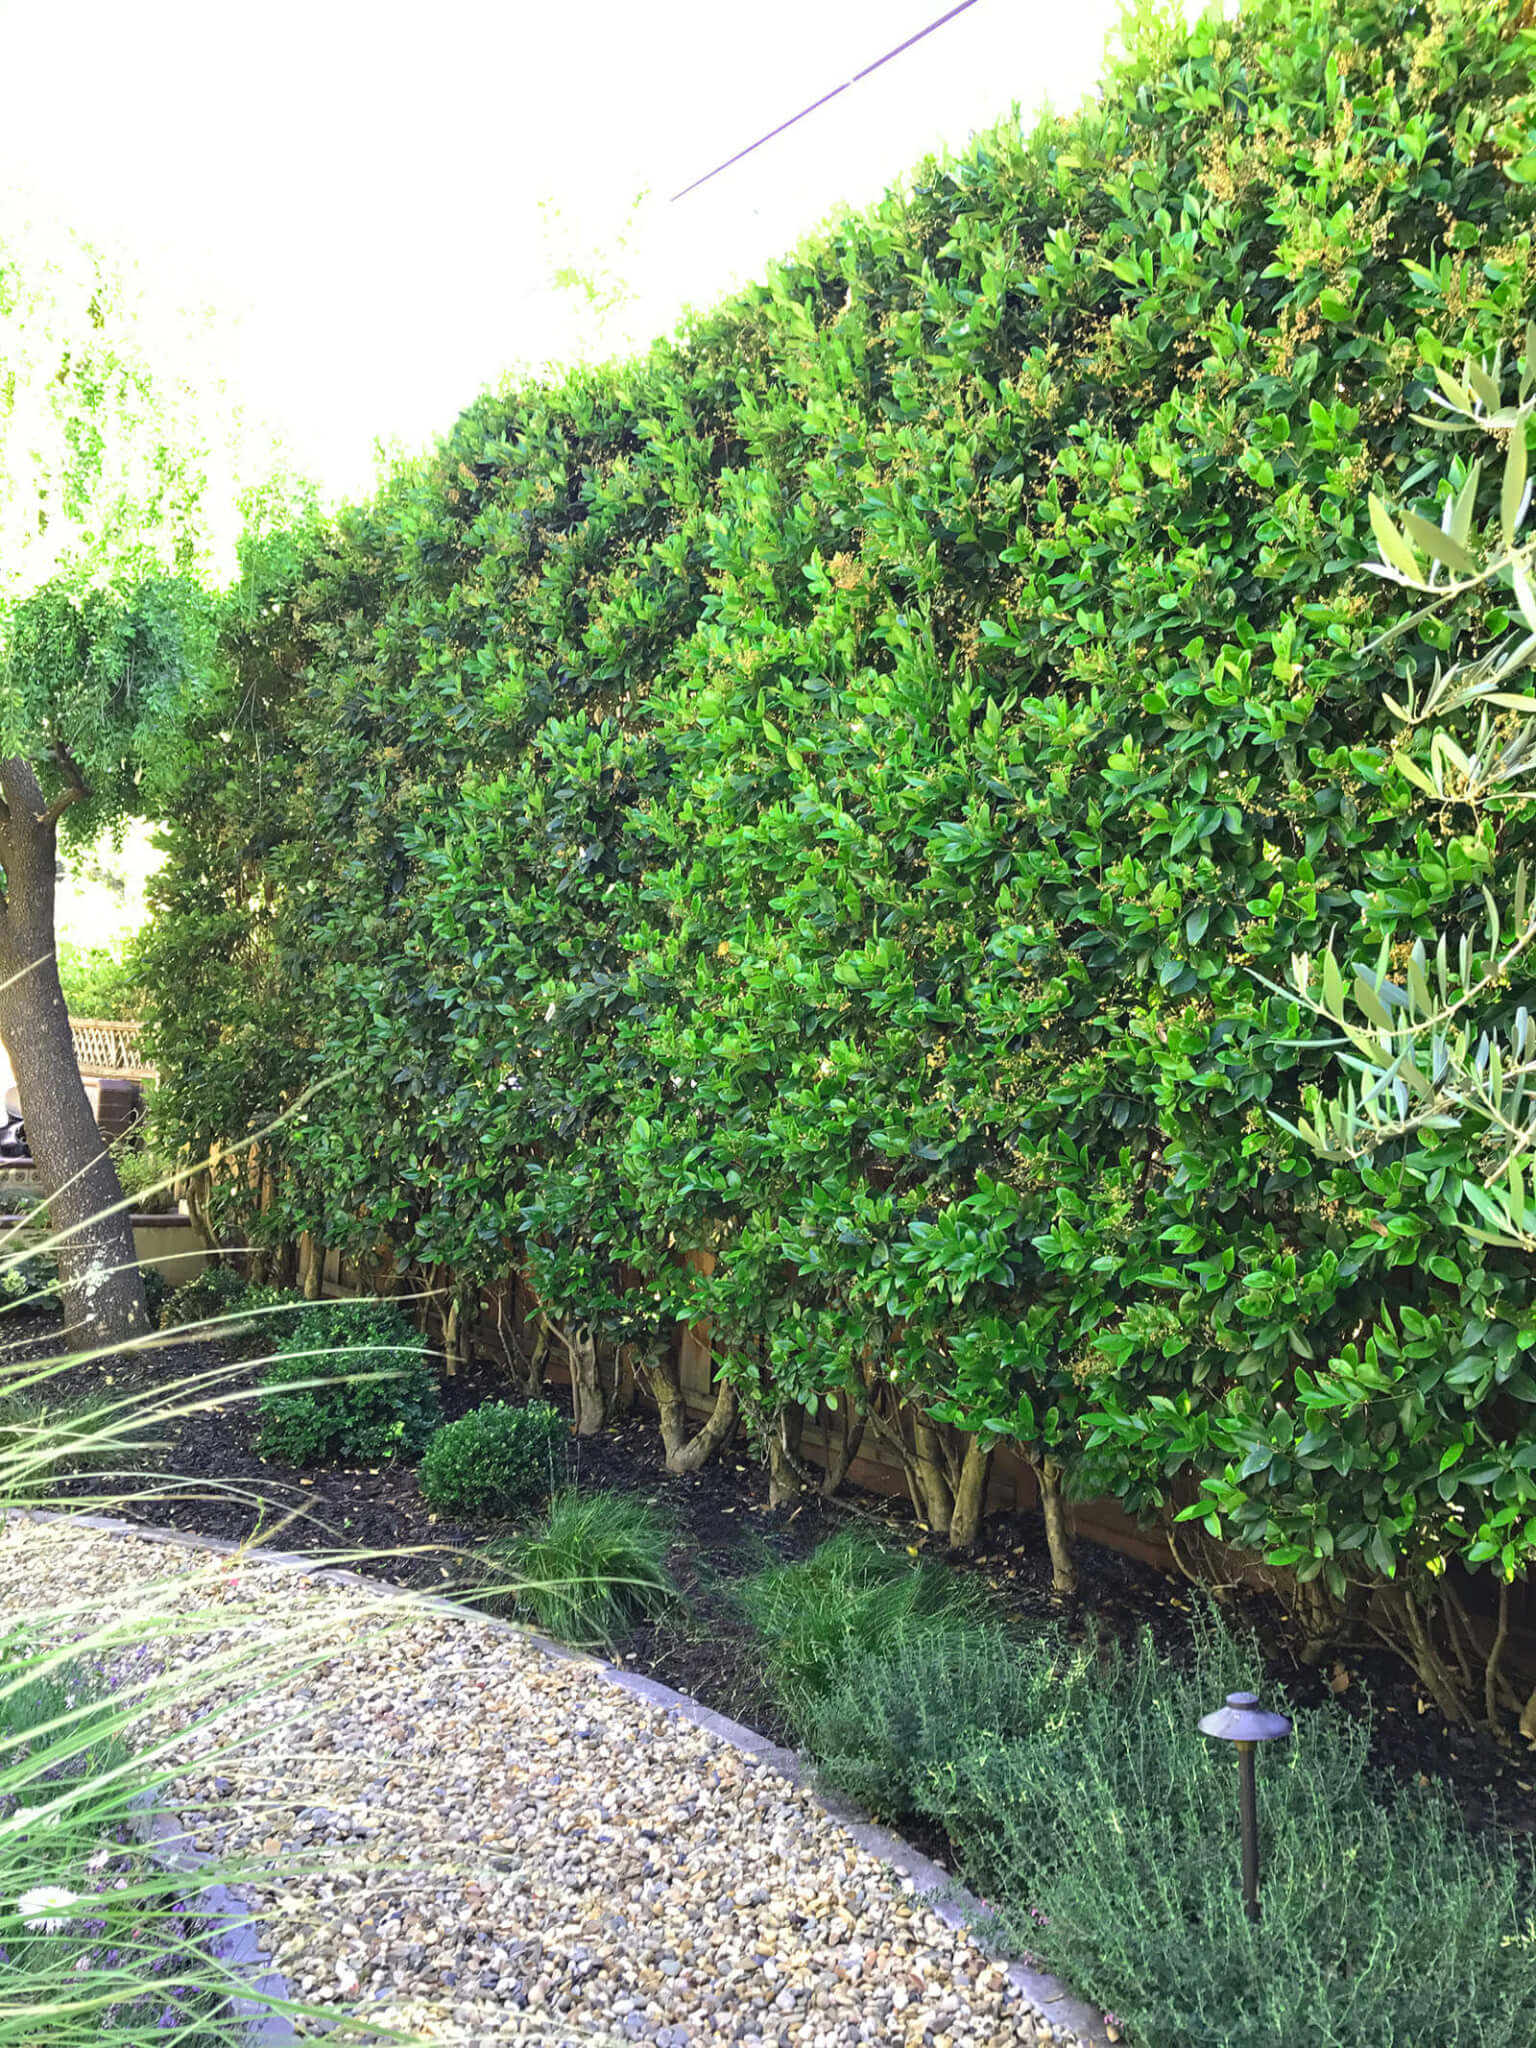 Tall screening hedge next to a stone-lined gravel path